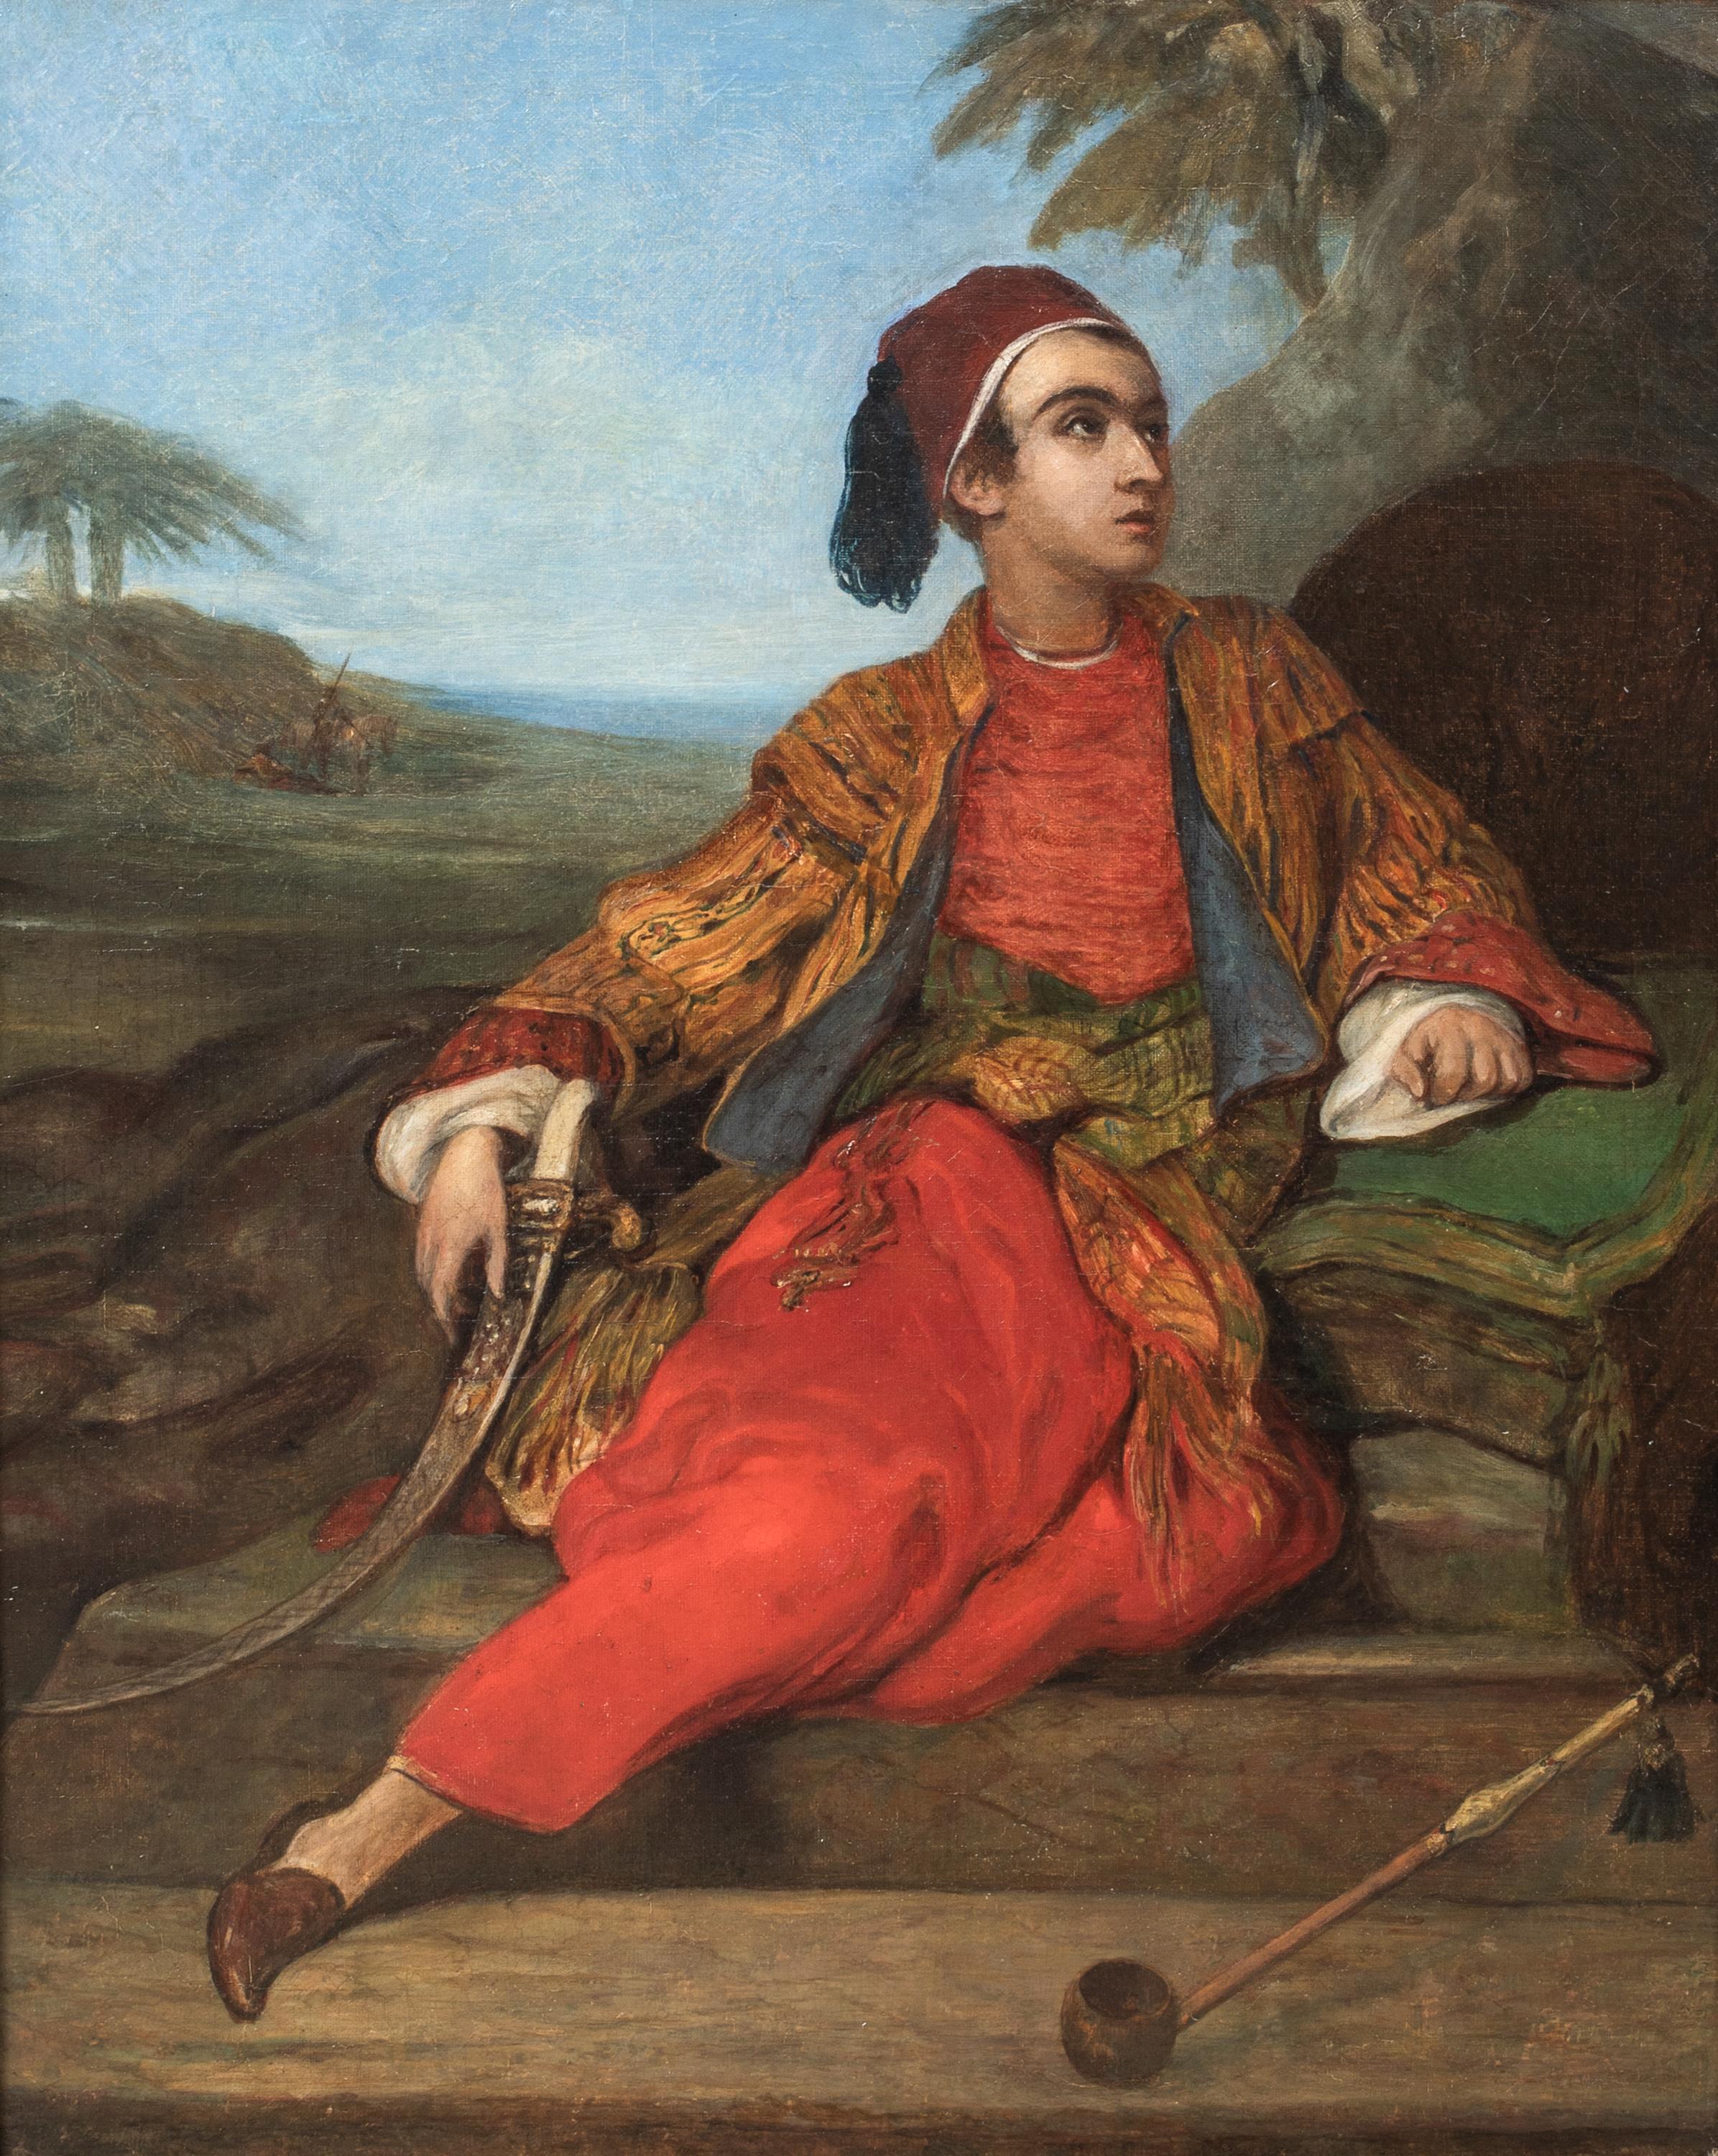 Portrait Of Lord Byron In Oriental Dress, circa 1810

circle of Thomas PHILLIPS (1770-1845)

Large circa 1810 portrait identified as a young Lord Byron in Ottoman attire, oil on canvas. Good quality and condition full length portrait wearing Ottoman